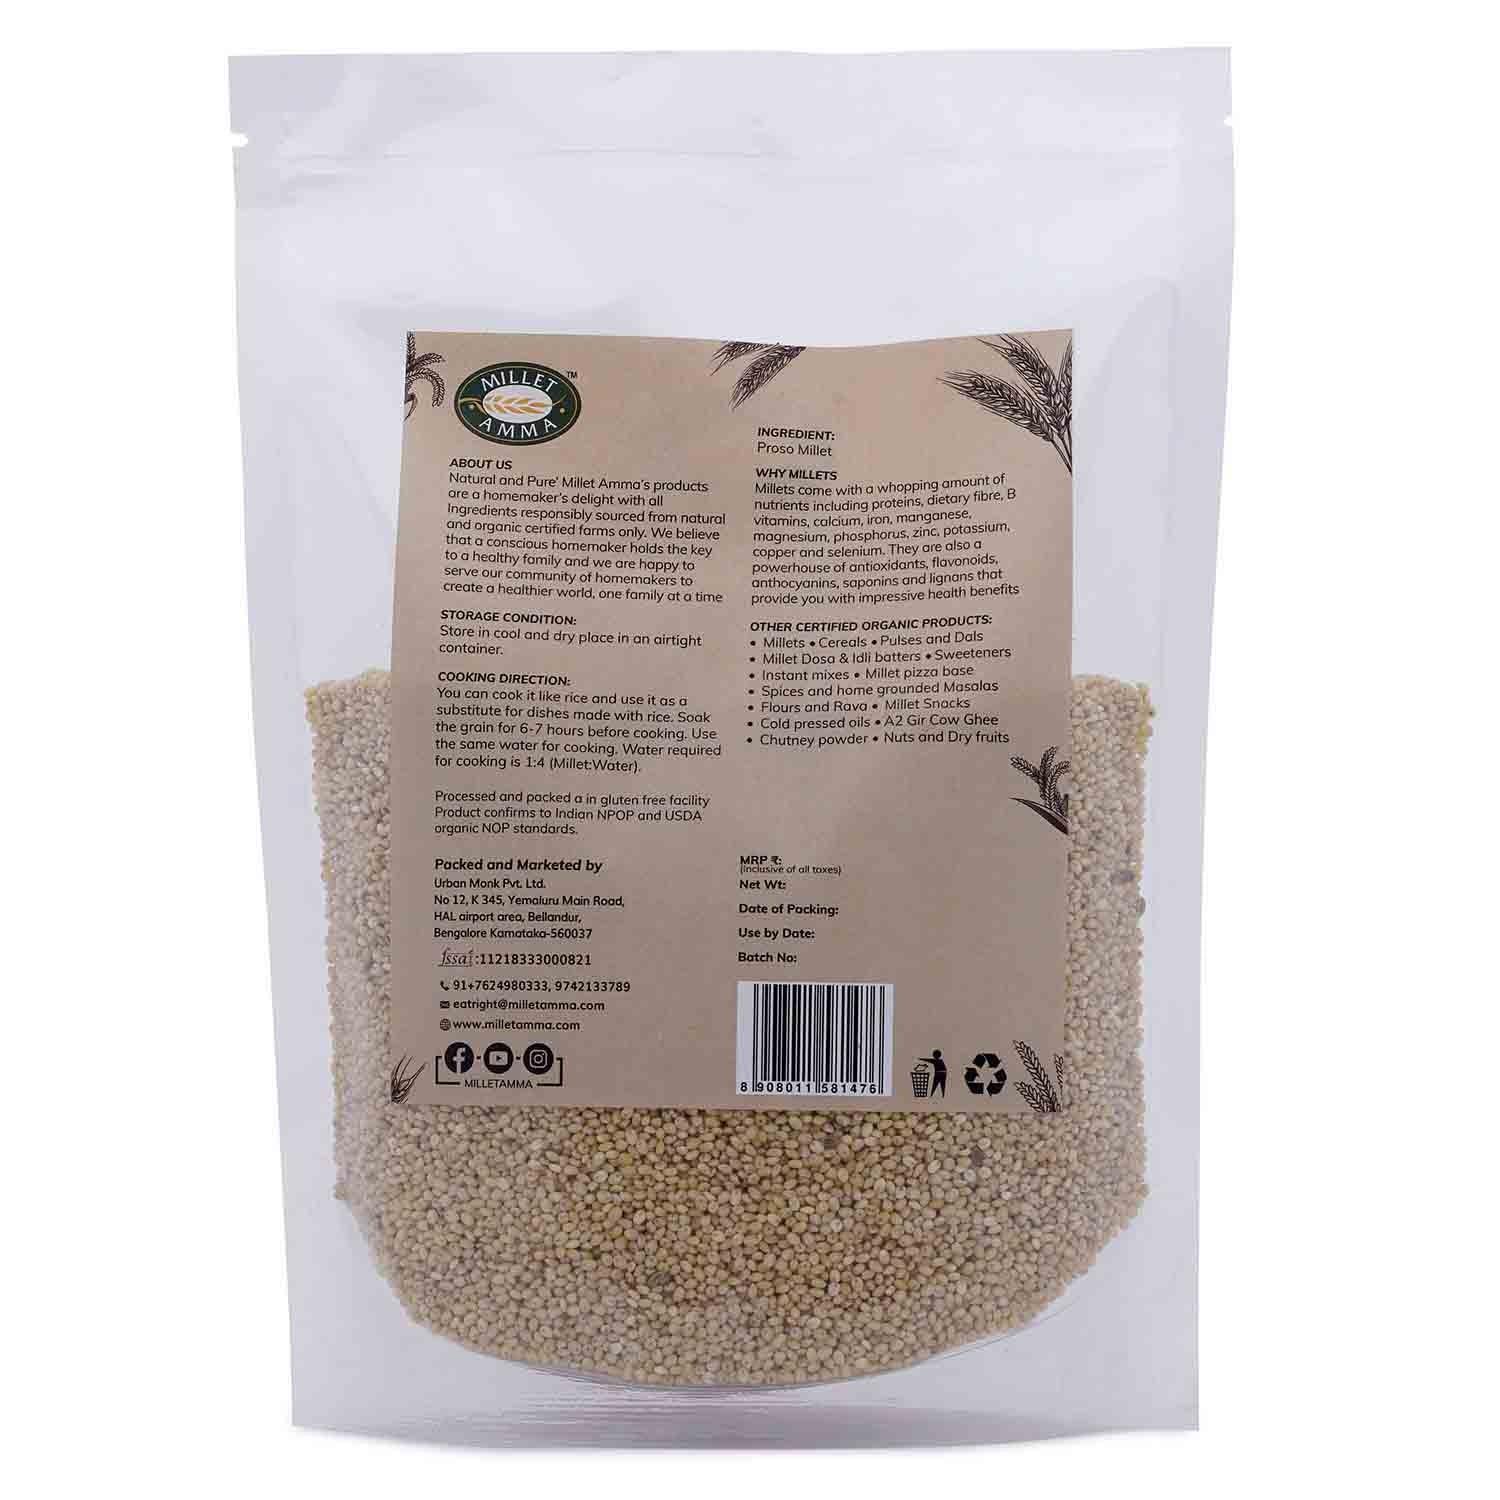 Millet Amma’s Organic Proso Millet- Millet Amma’s Organic Proso Millet contains high levels of lecithin.  These unpolished Proso Millets are rich in B Complex vitamins and essential amino acids.  Proso Millet has a low glycemic index and aids in controlling your glucose levels.